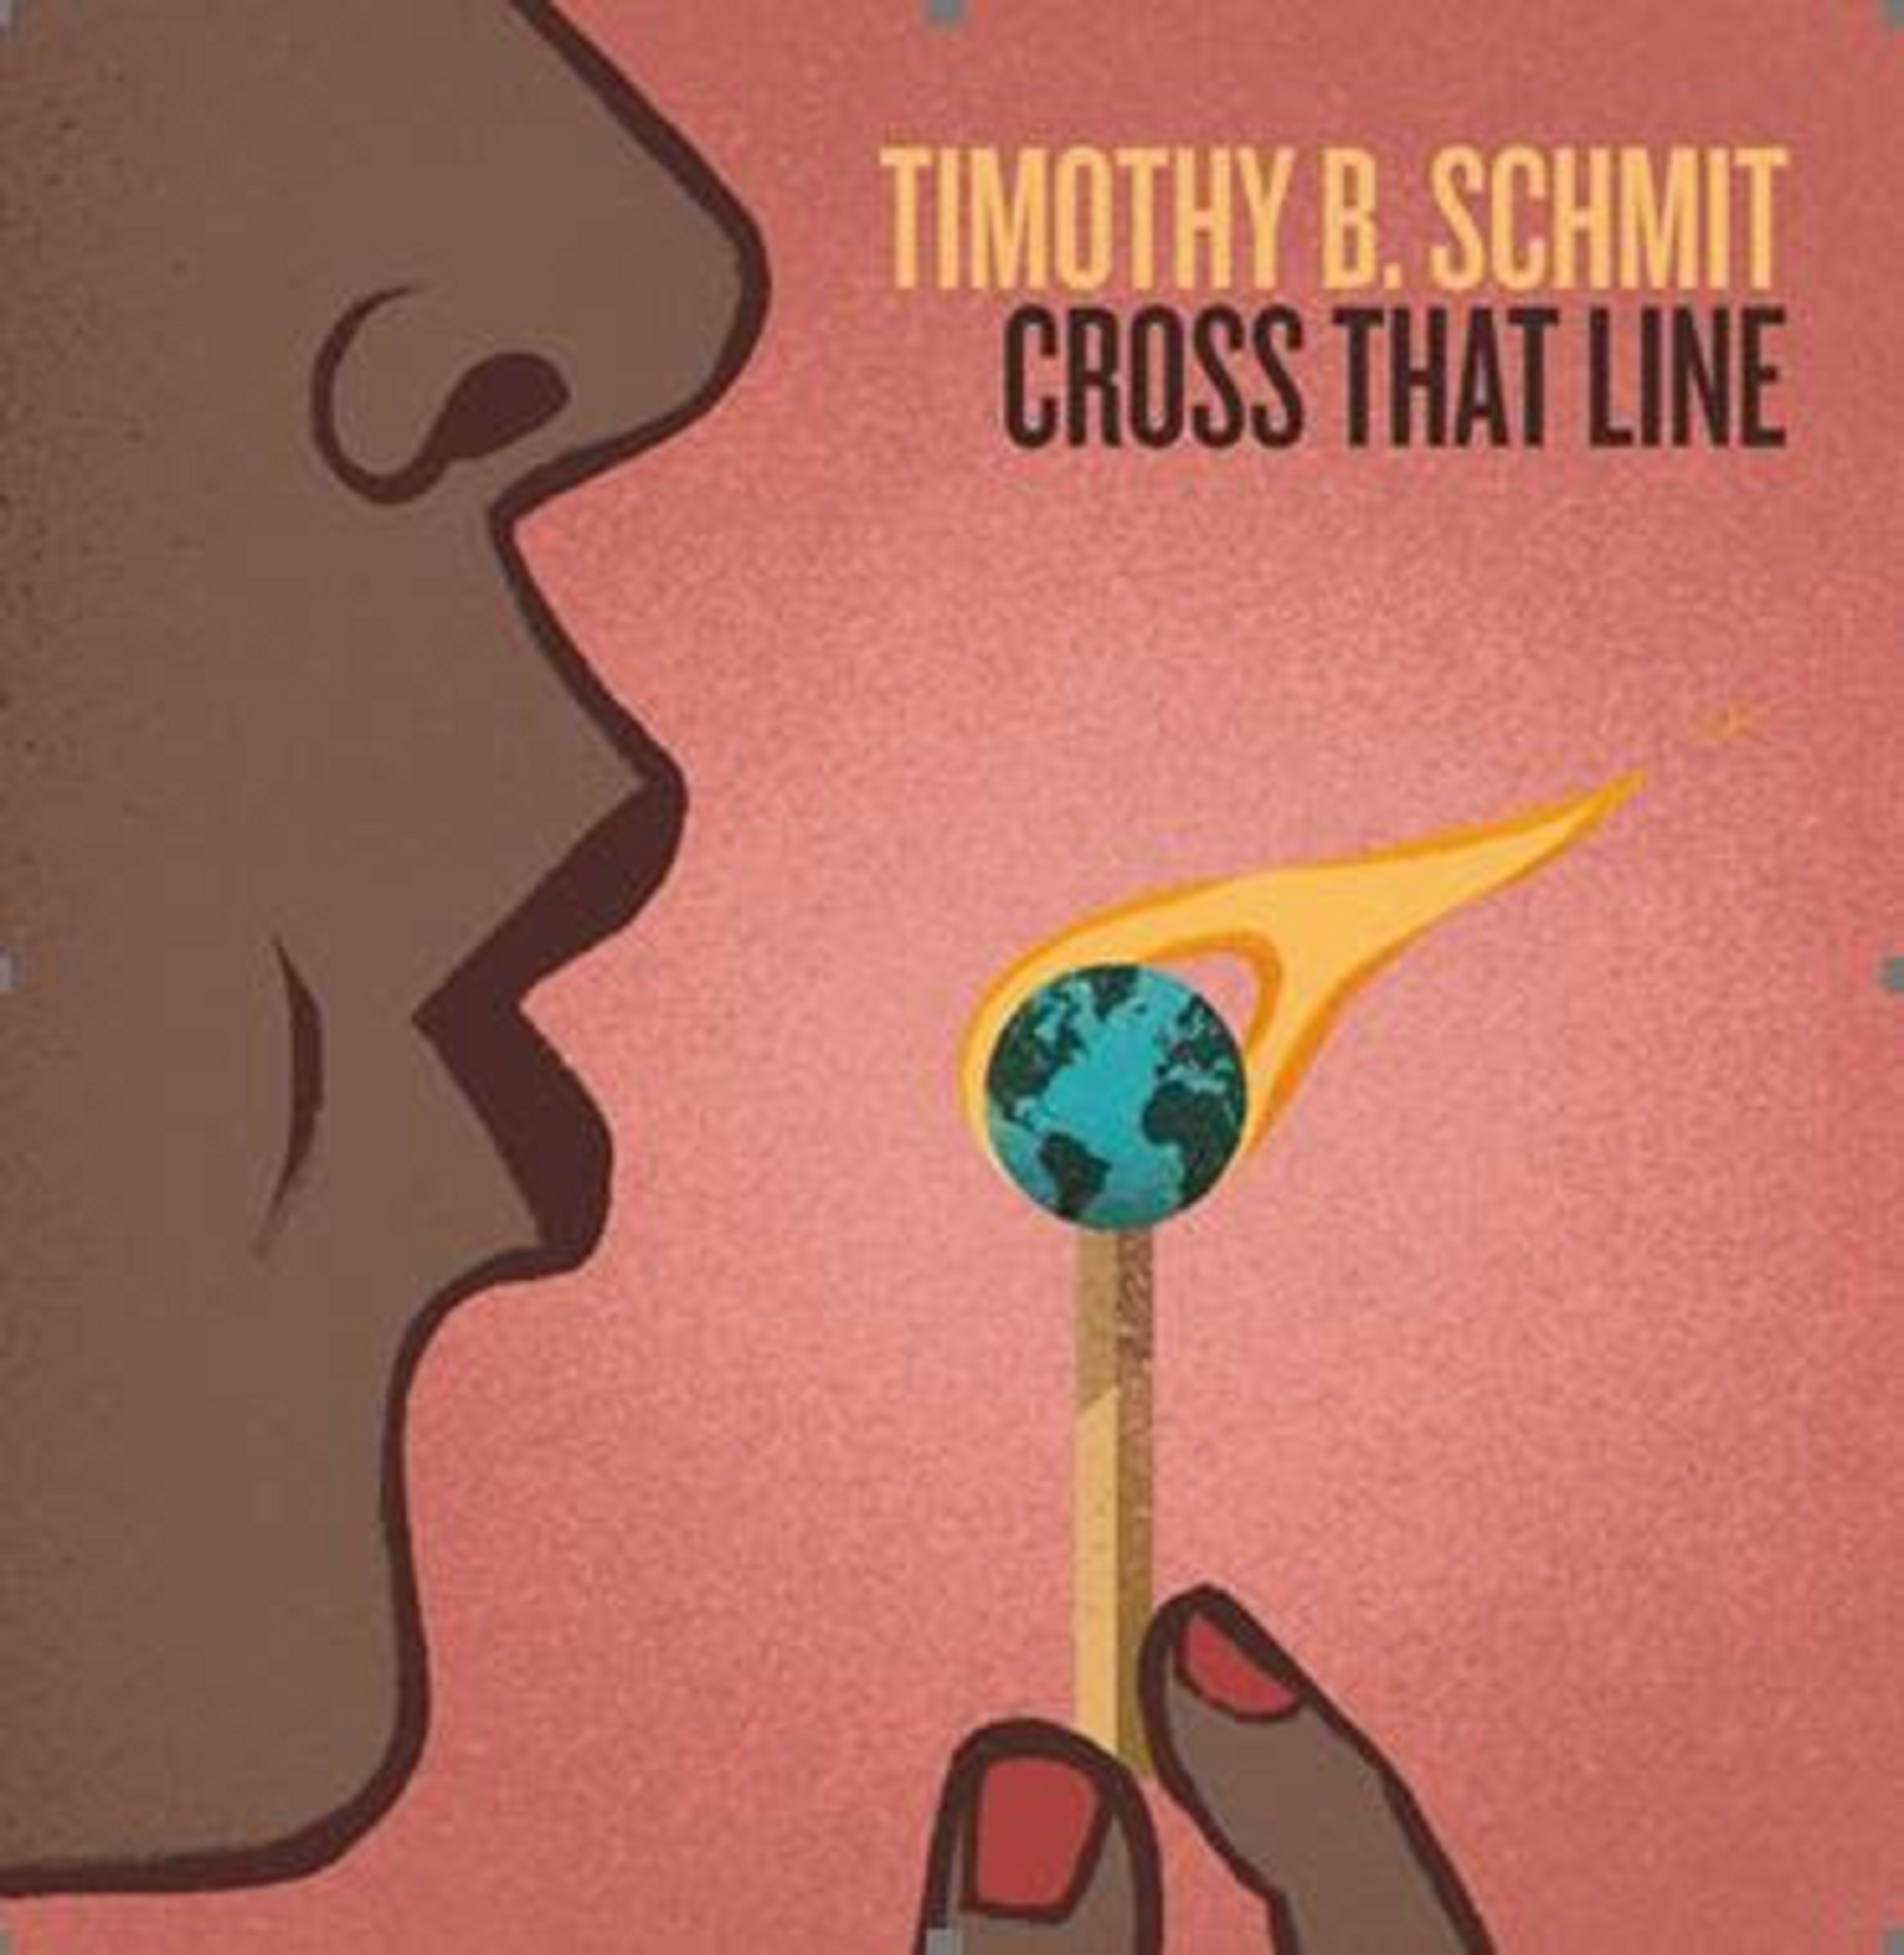 Timothy B. Schmit Releases New Single - "Cross That Line"